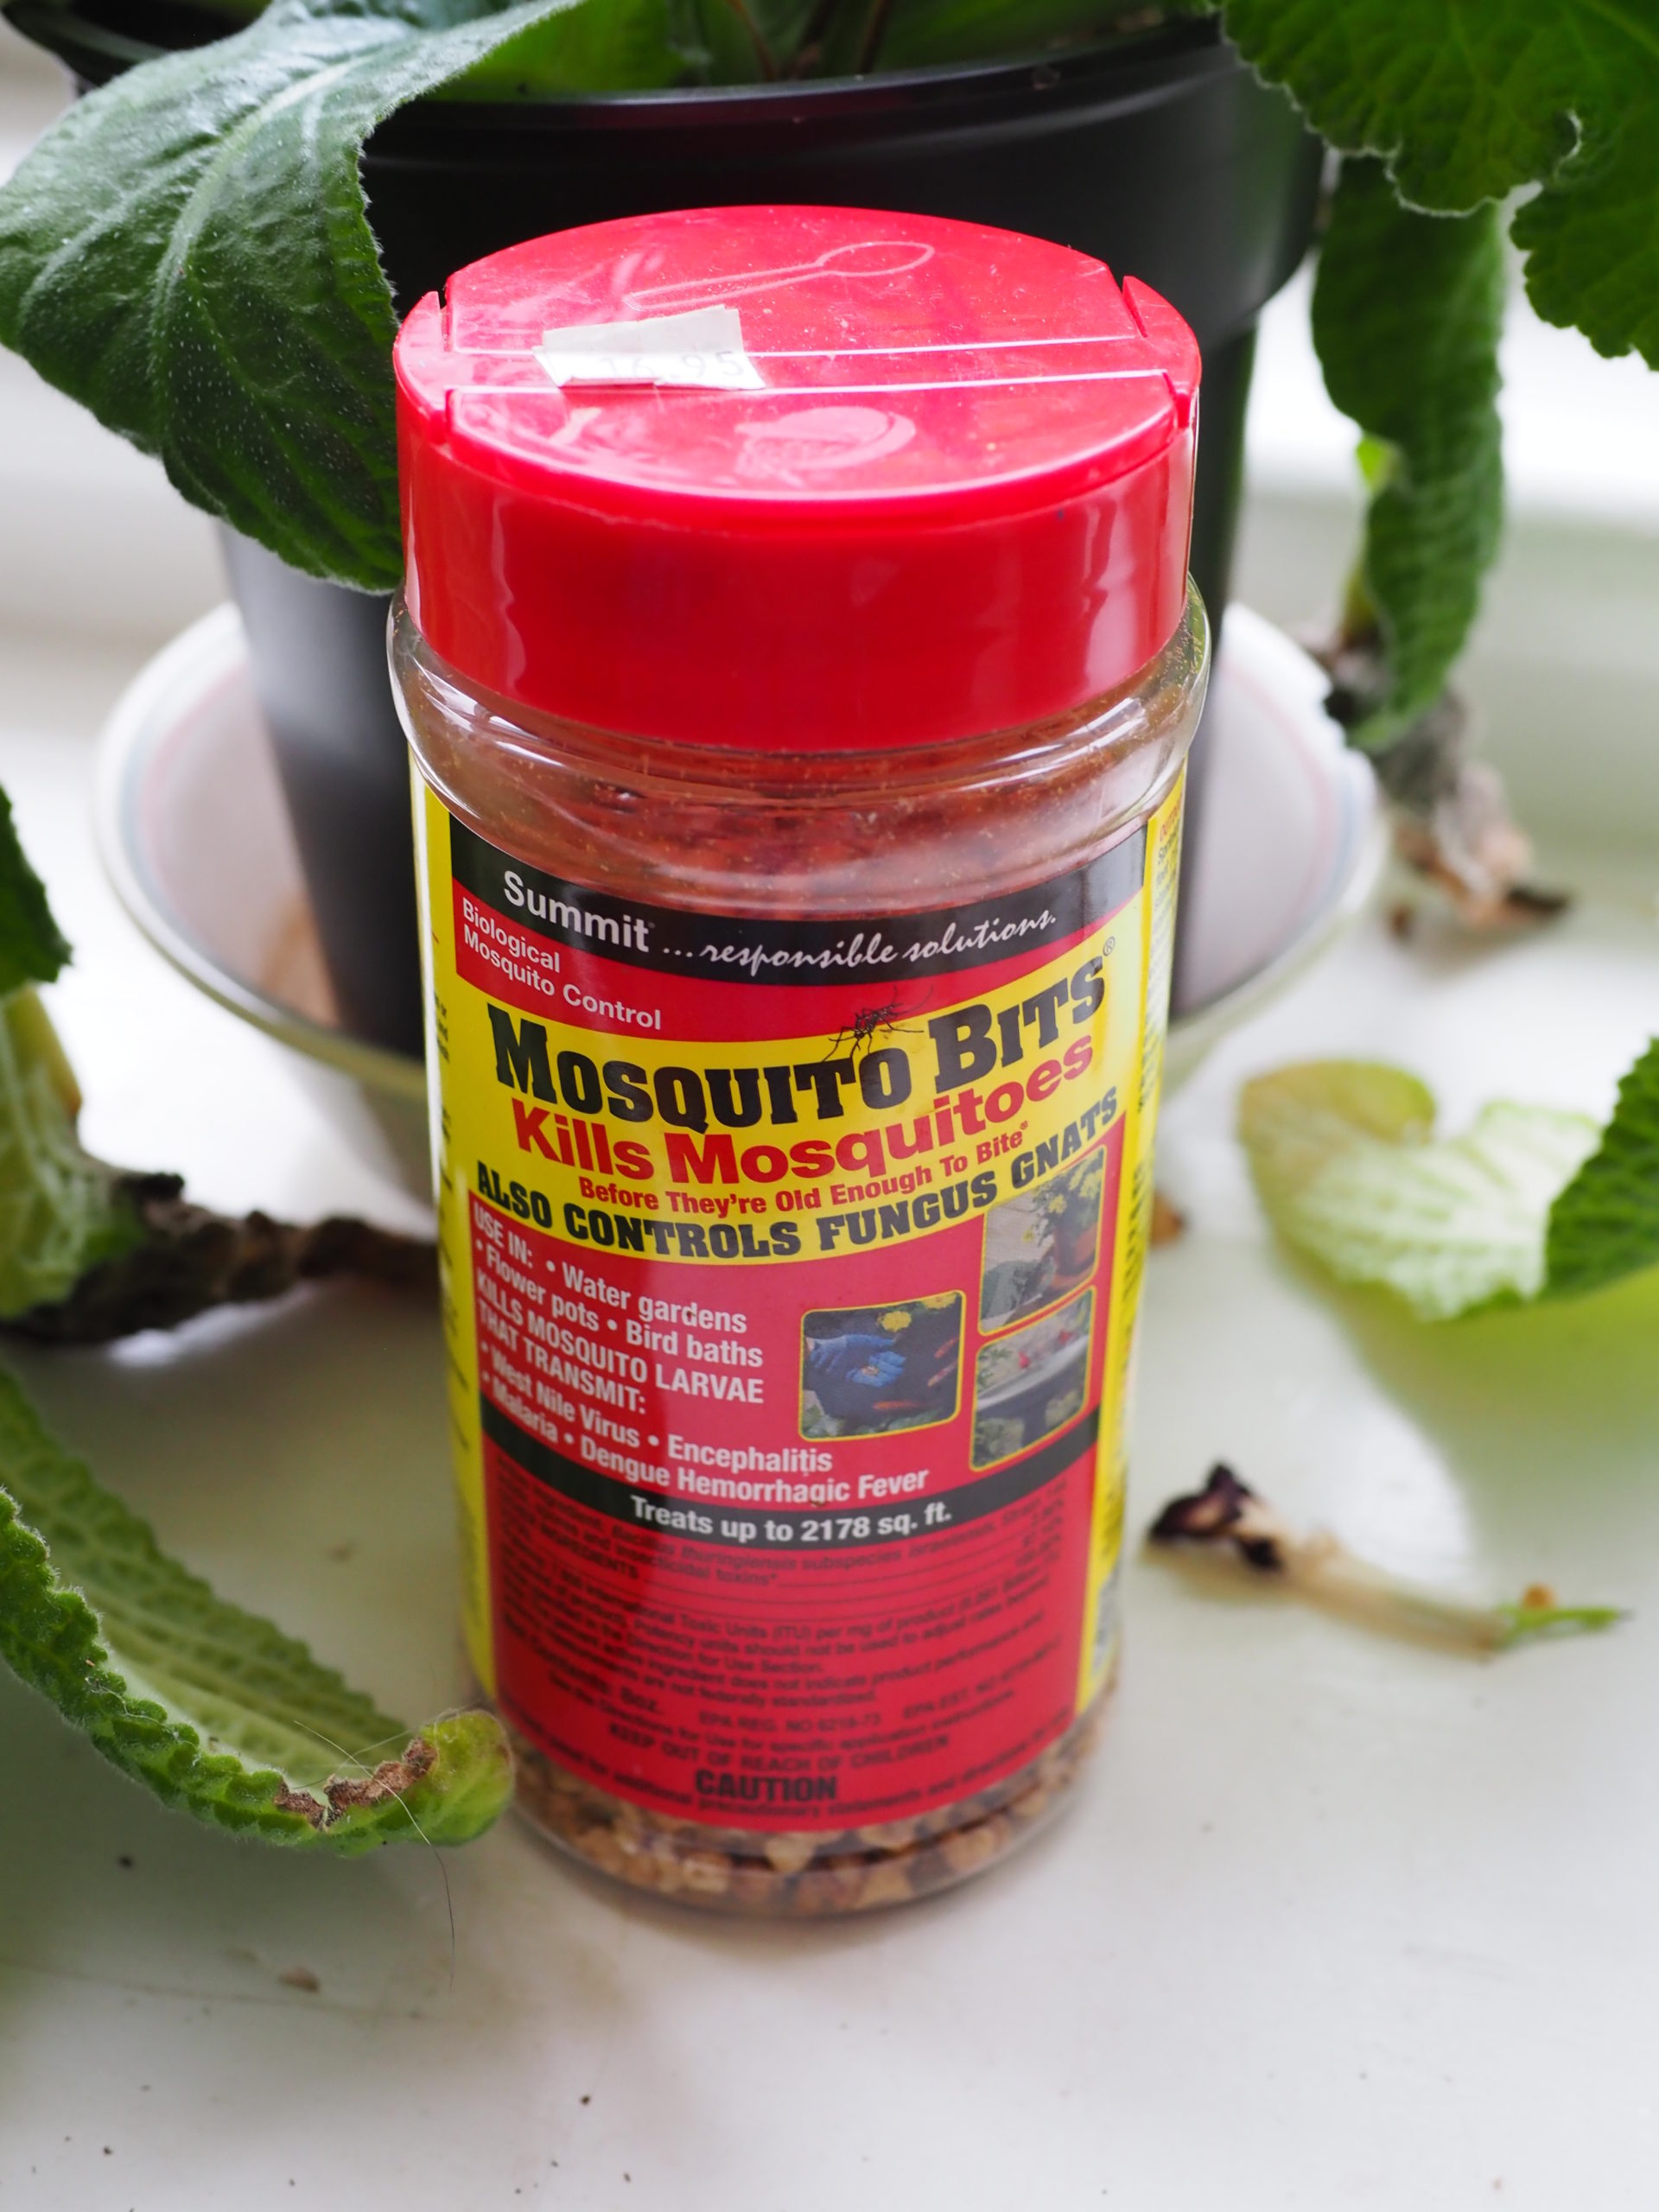 A product sold as Mosquito Bits is a Bacillus that will control fungus gnats when applied to the soil according to the label directions. Full control may take several weeks. This product is available at most garden stores.